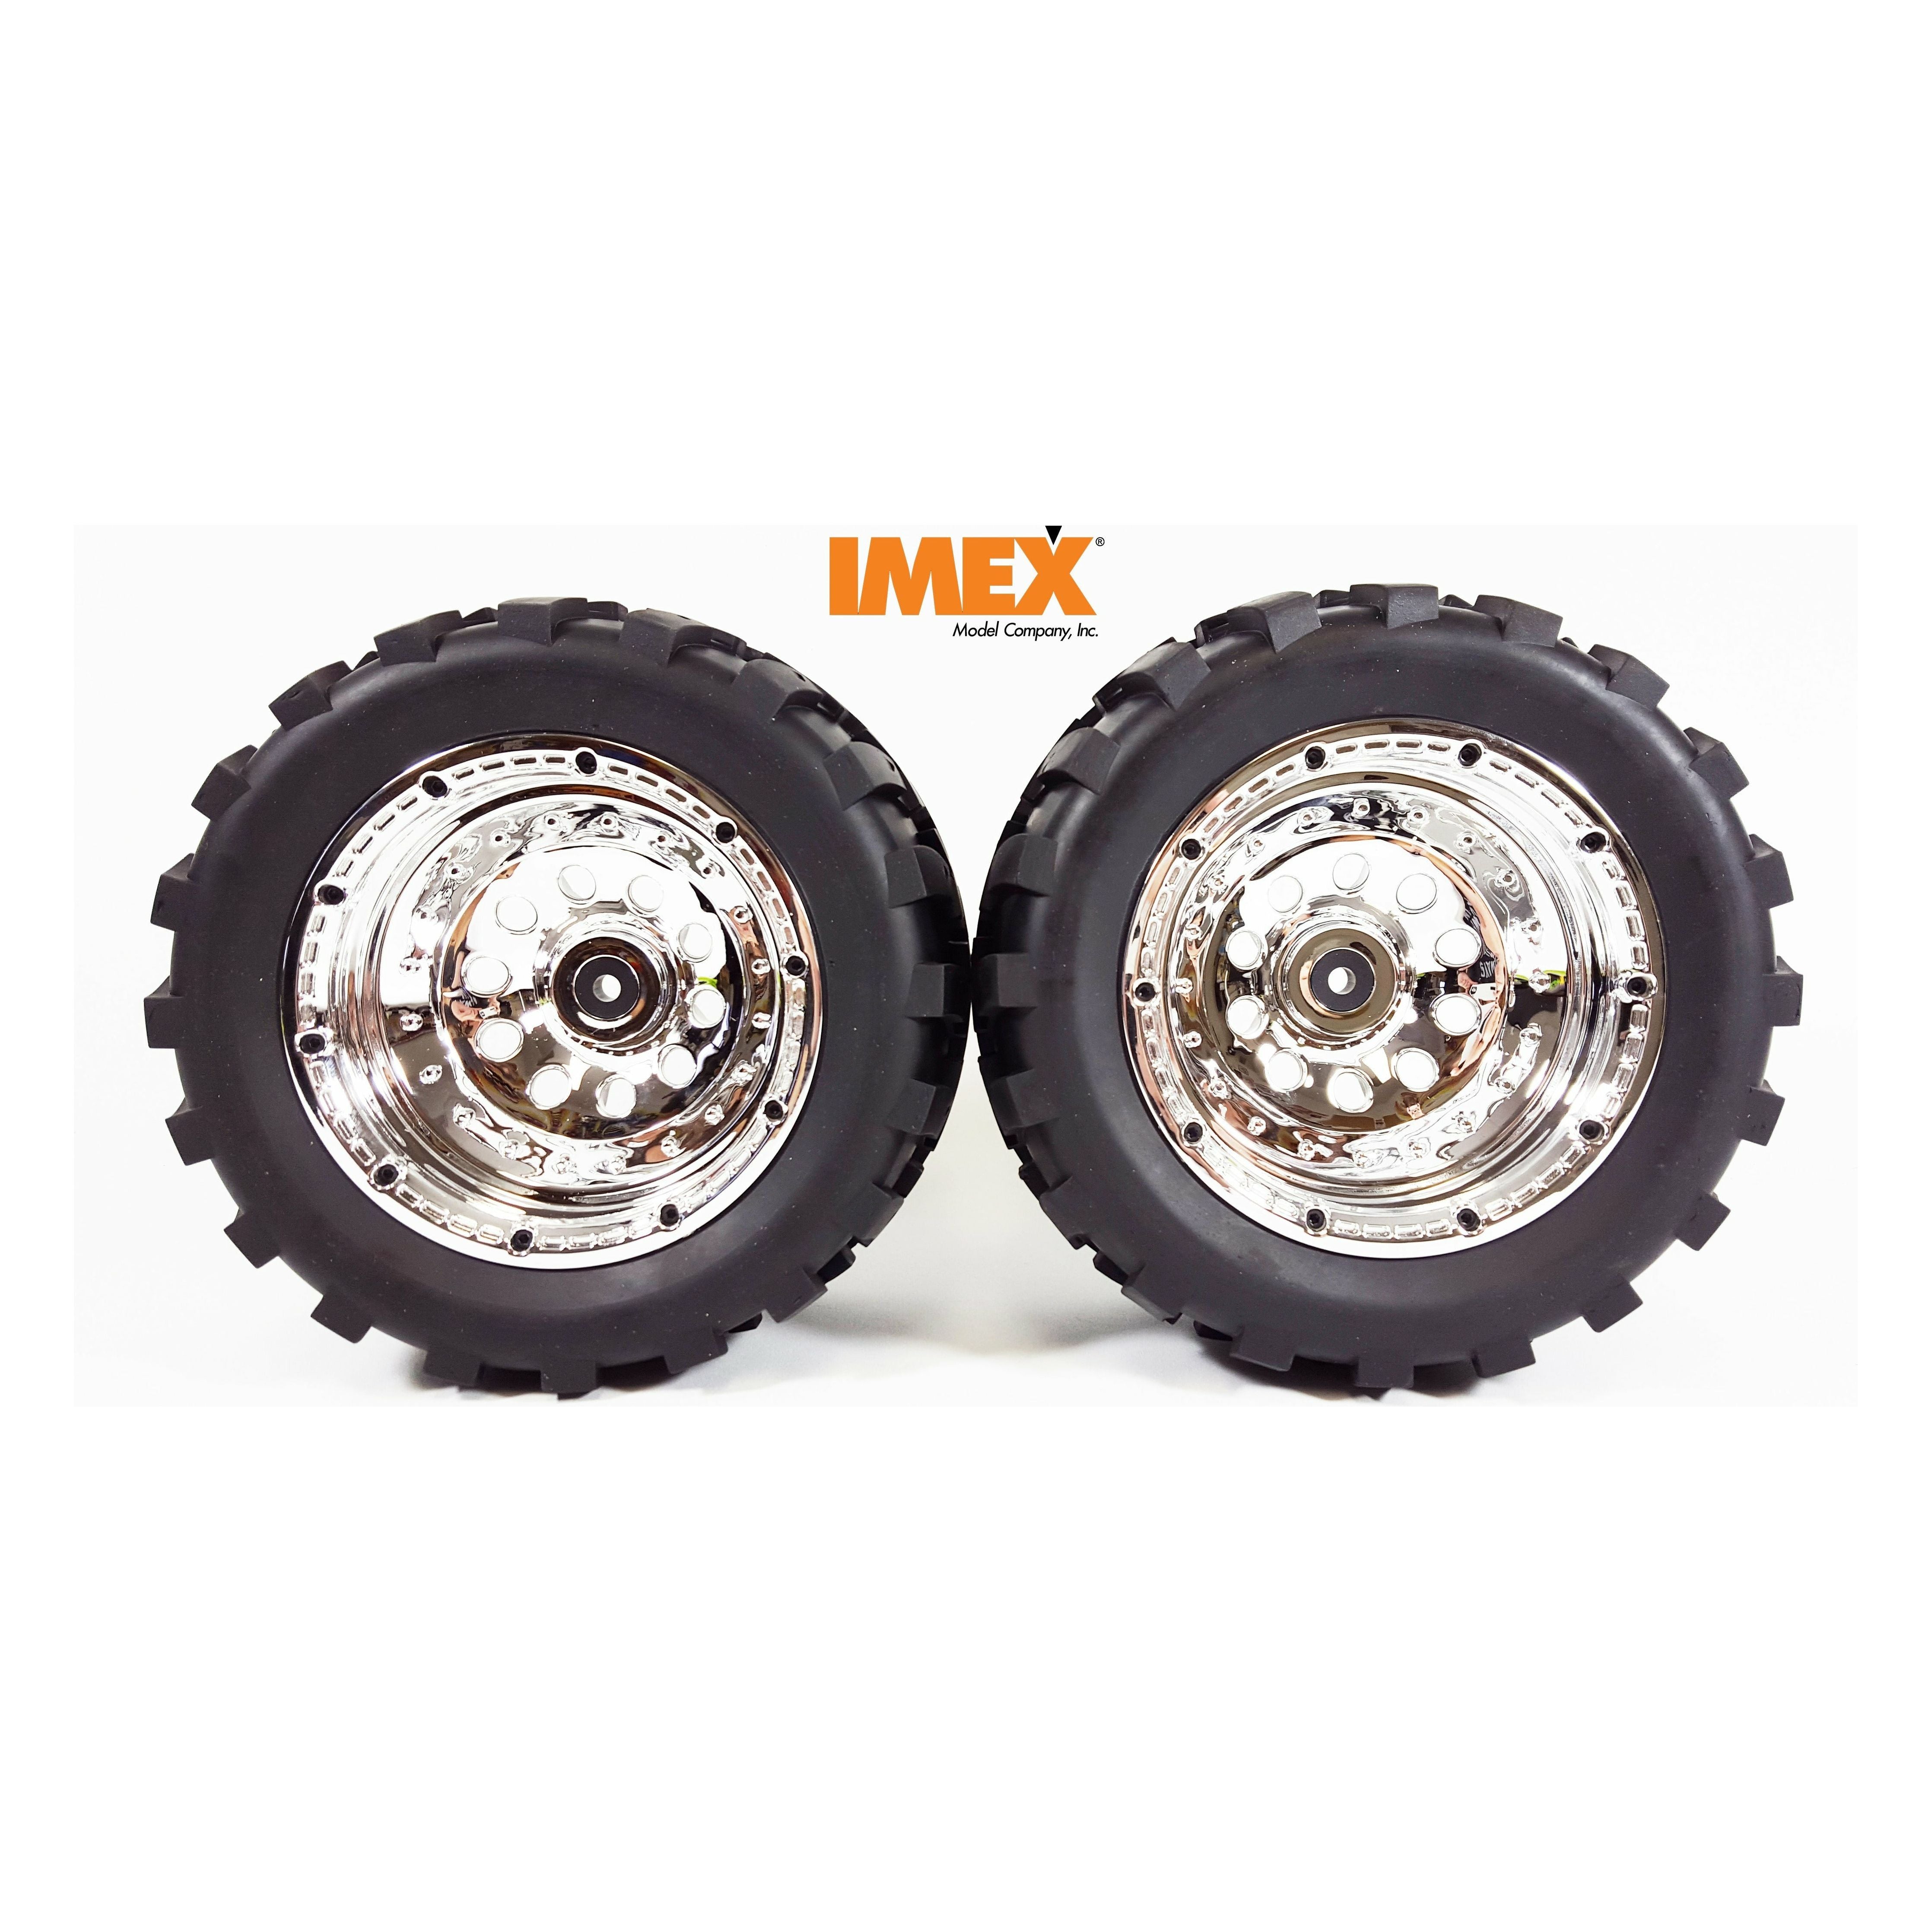 J-7 Tires & Pluto Rims with Beadlocks 24mm Hex (1 Pair) (Choose Color Combos)